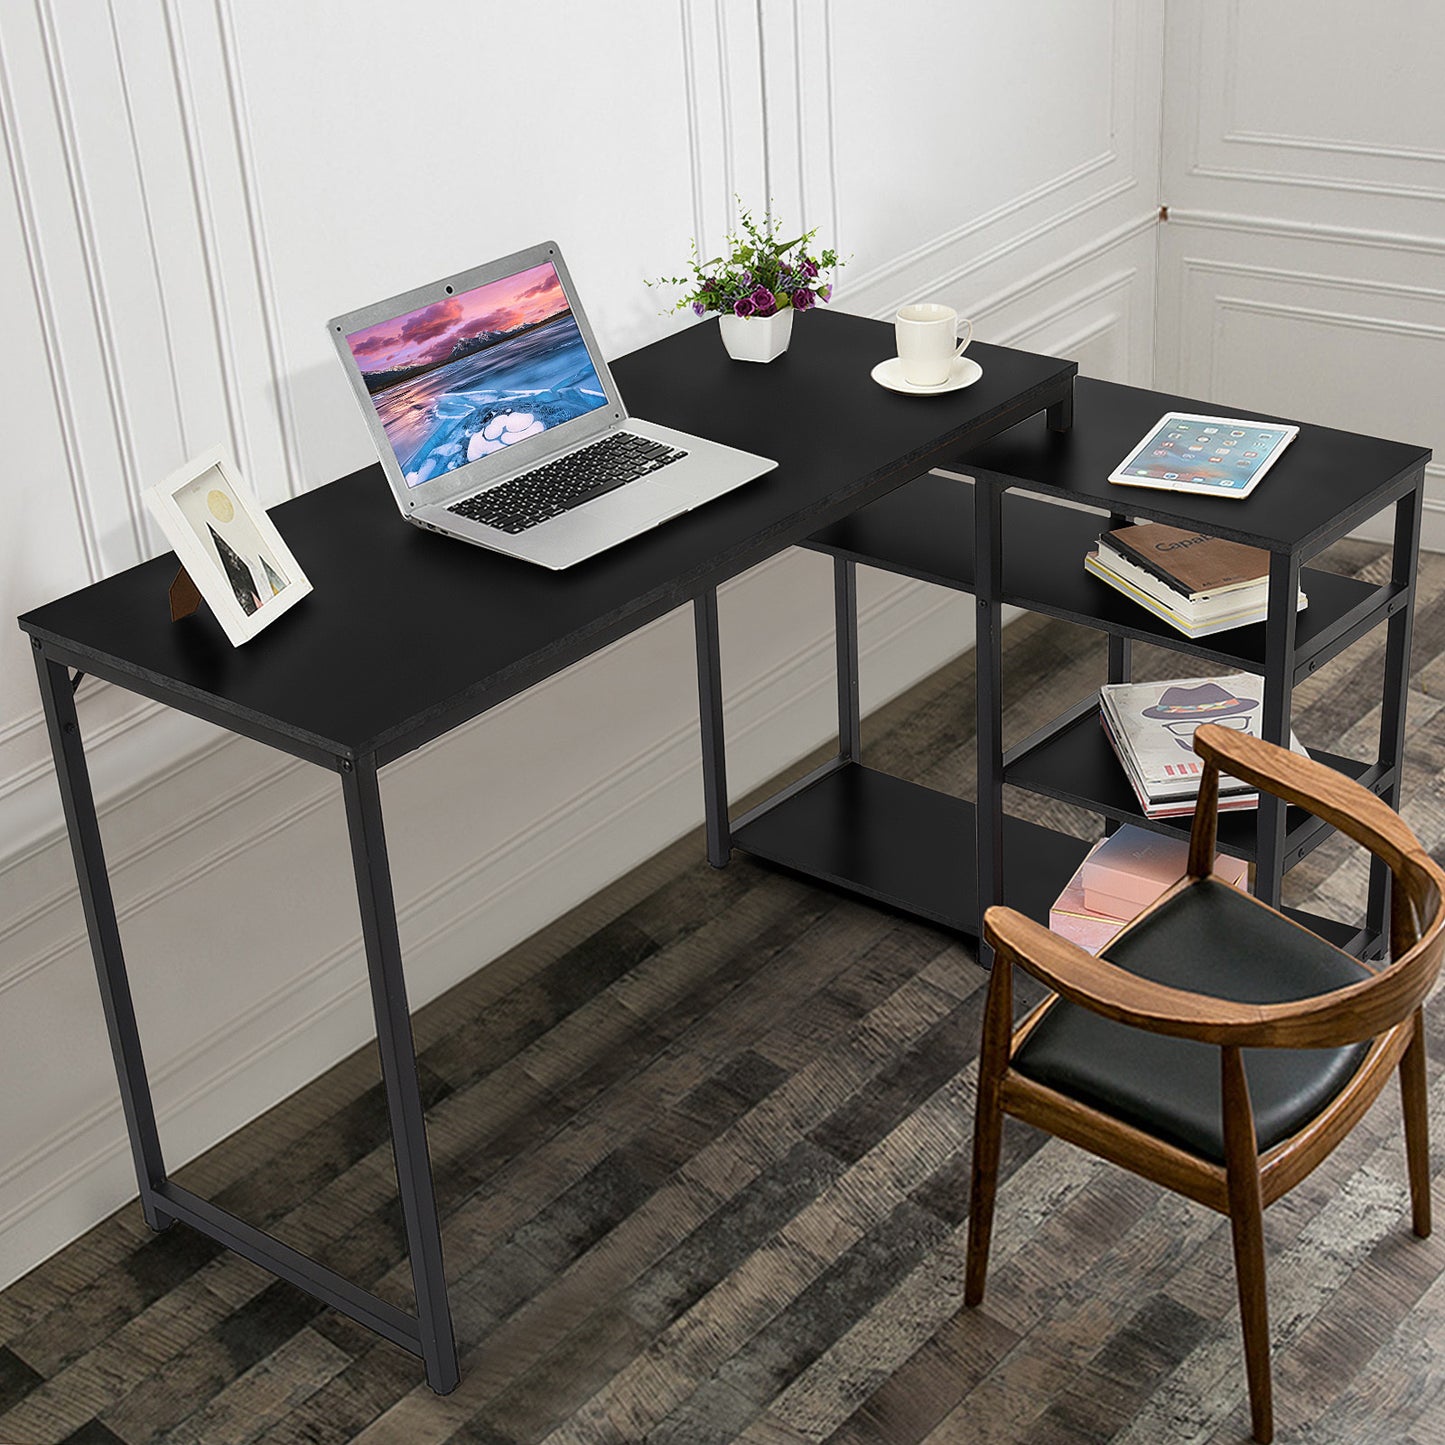 L-Shaped Computer Desk With Storage Shelves Study Table For Home Office